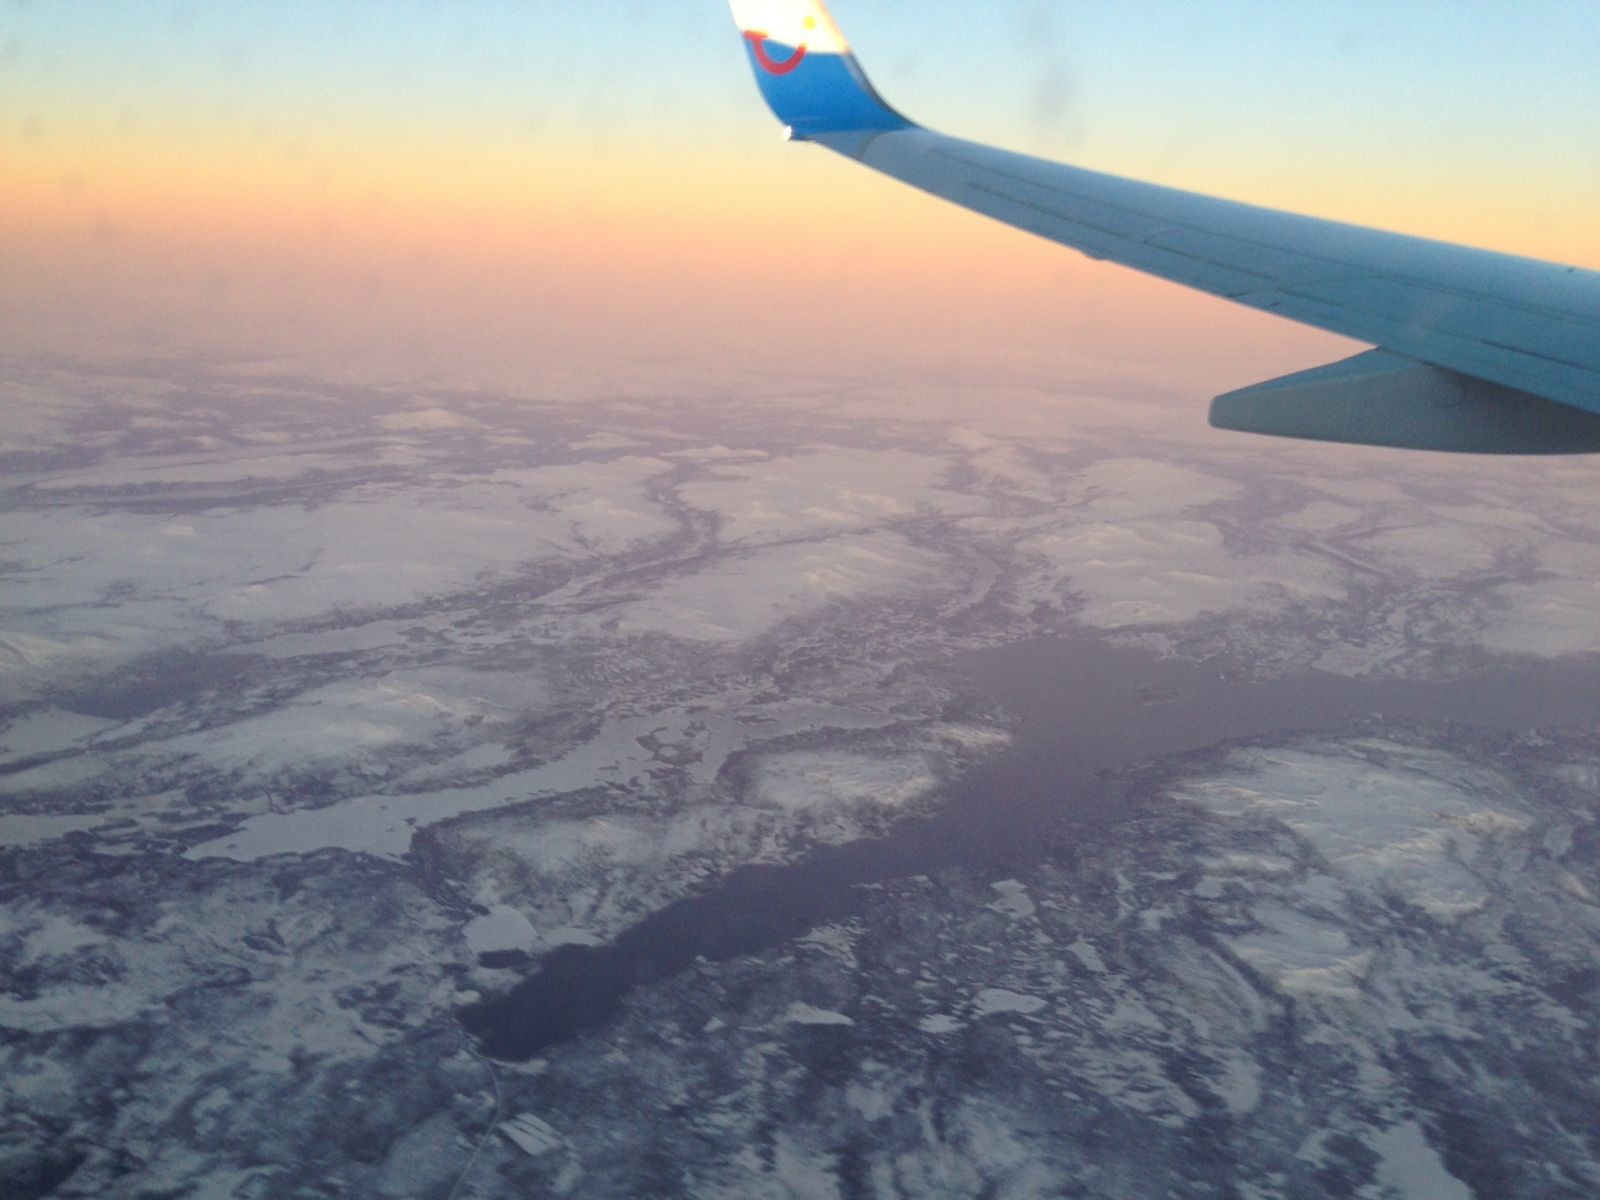 The view over Norway on the way to finland